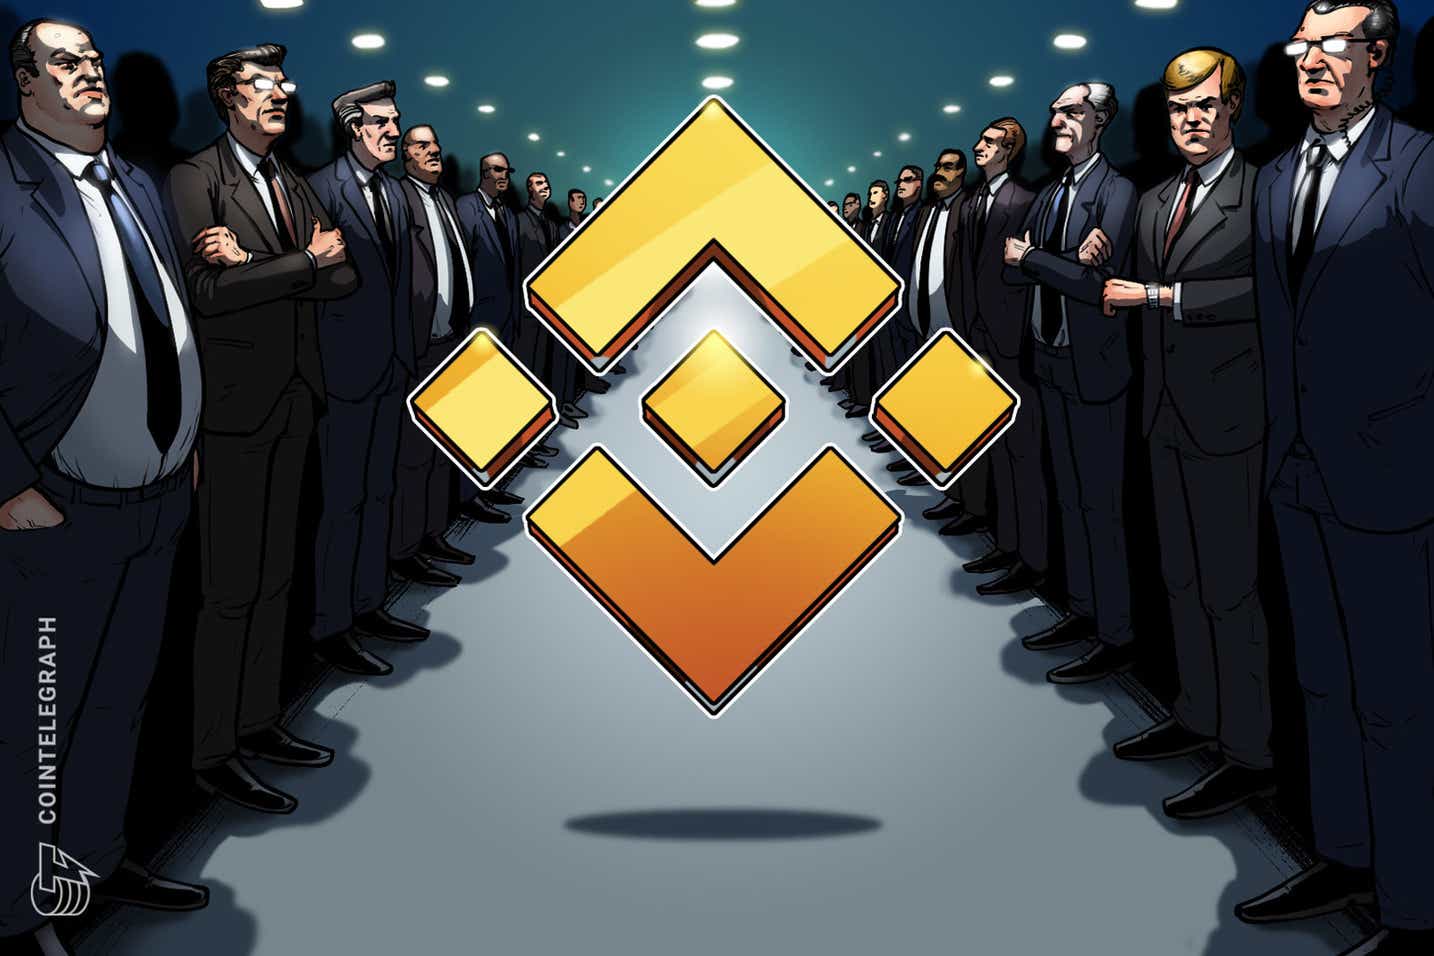 Reuters: Binance was withholding information from regulators, repeatedly  shunned own compliance department